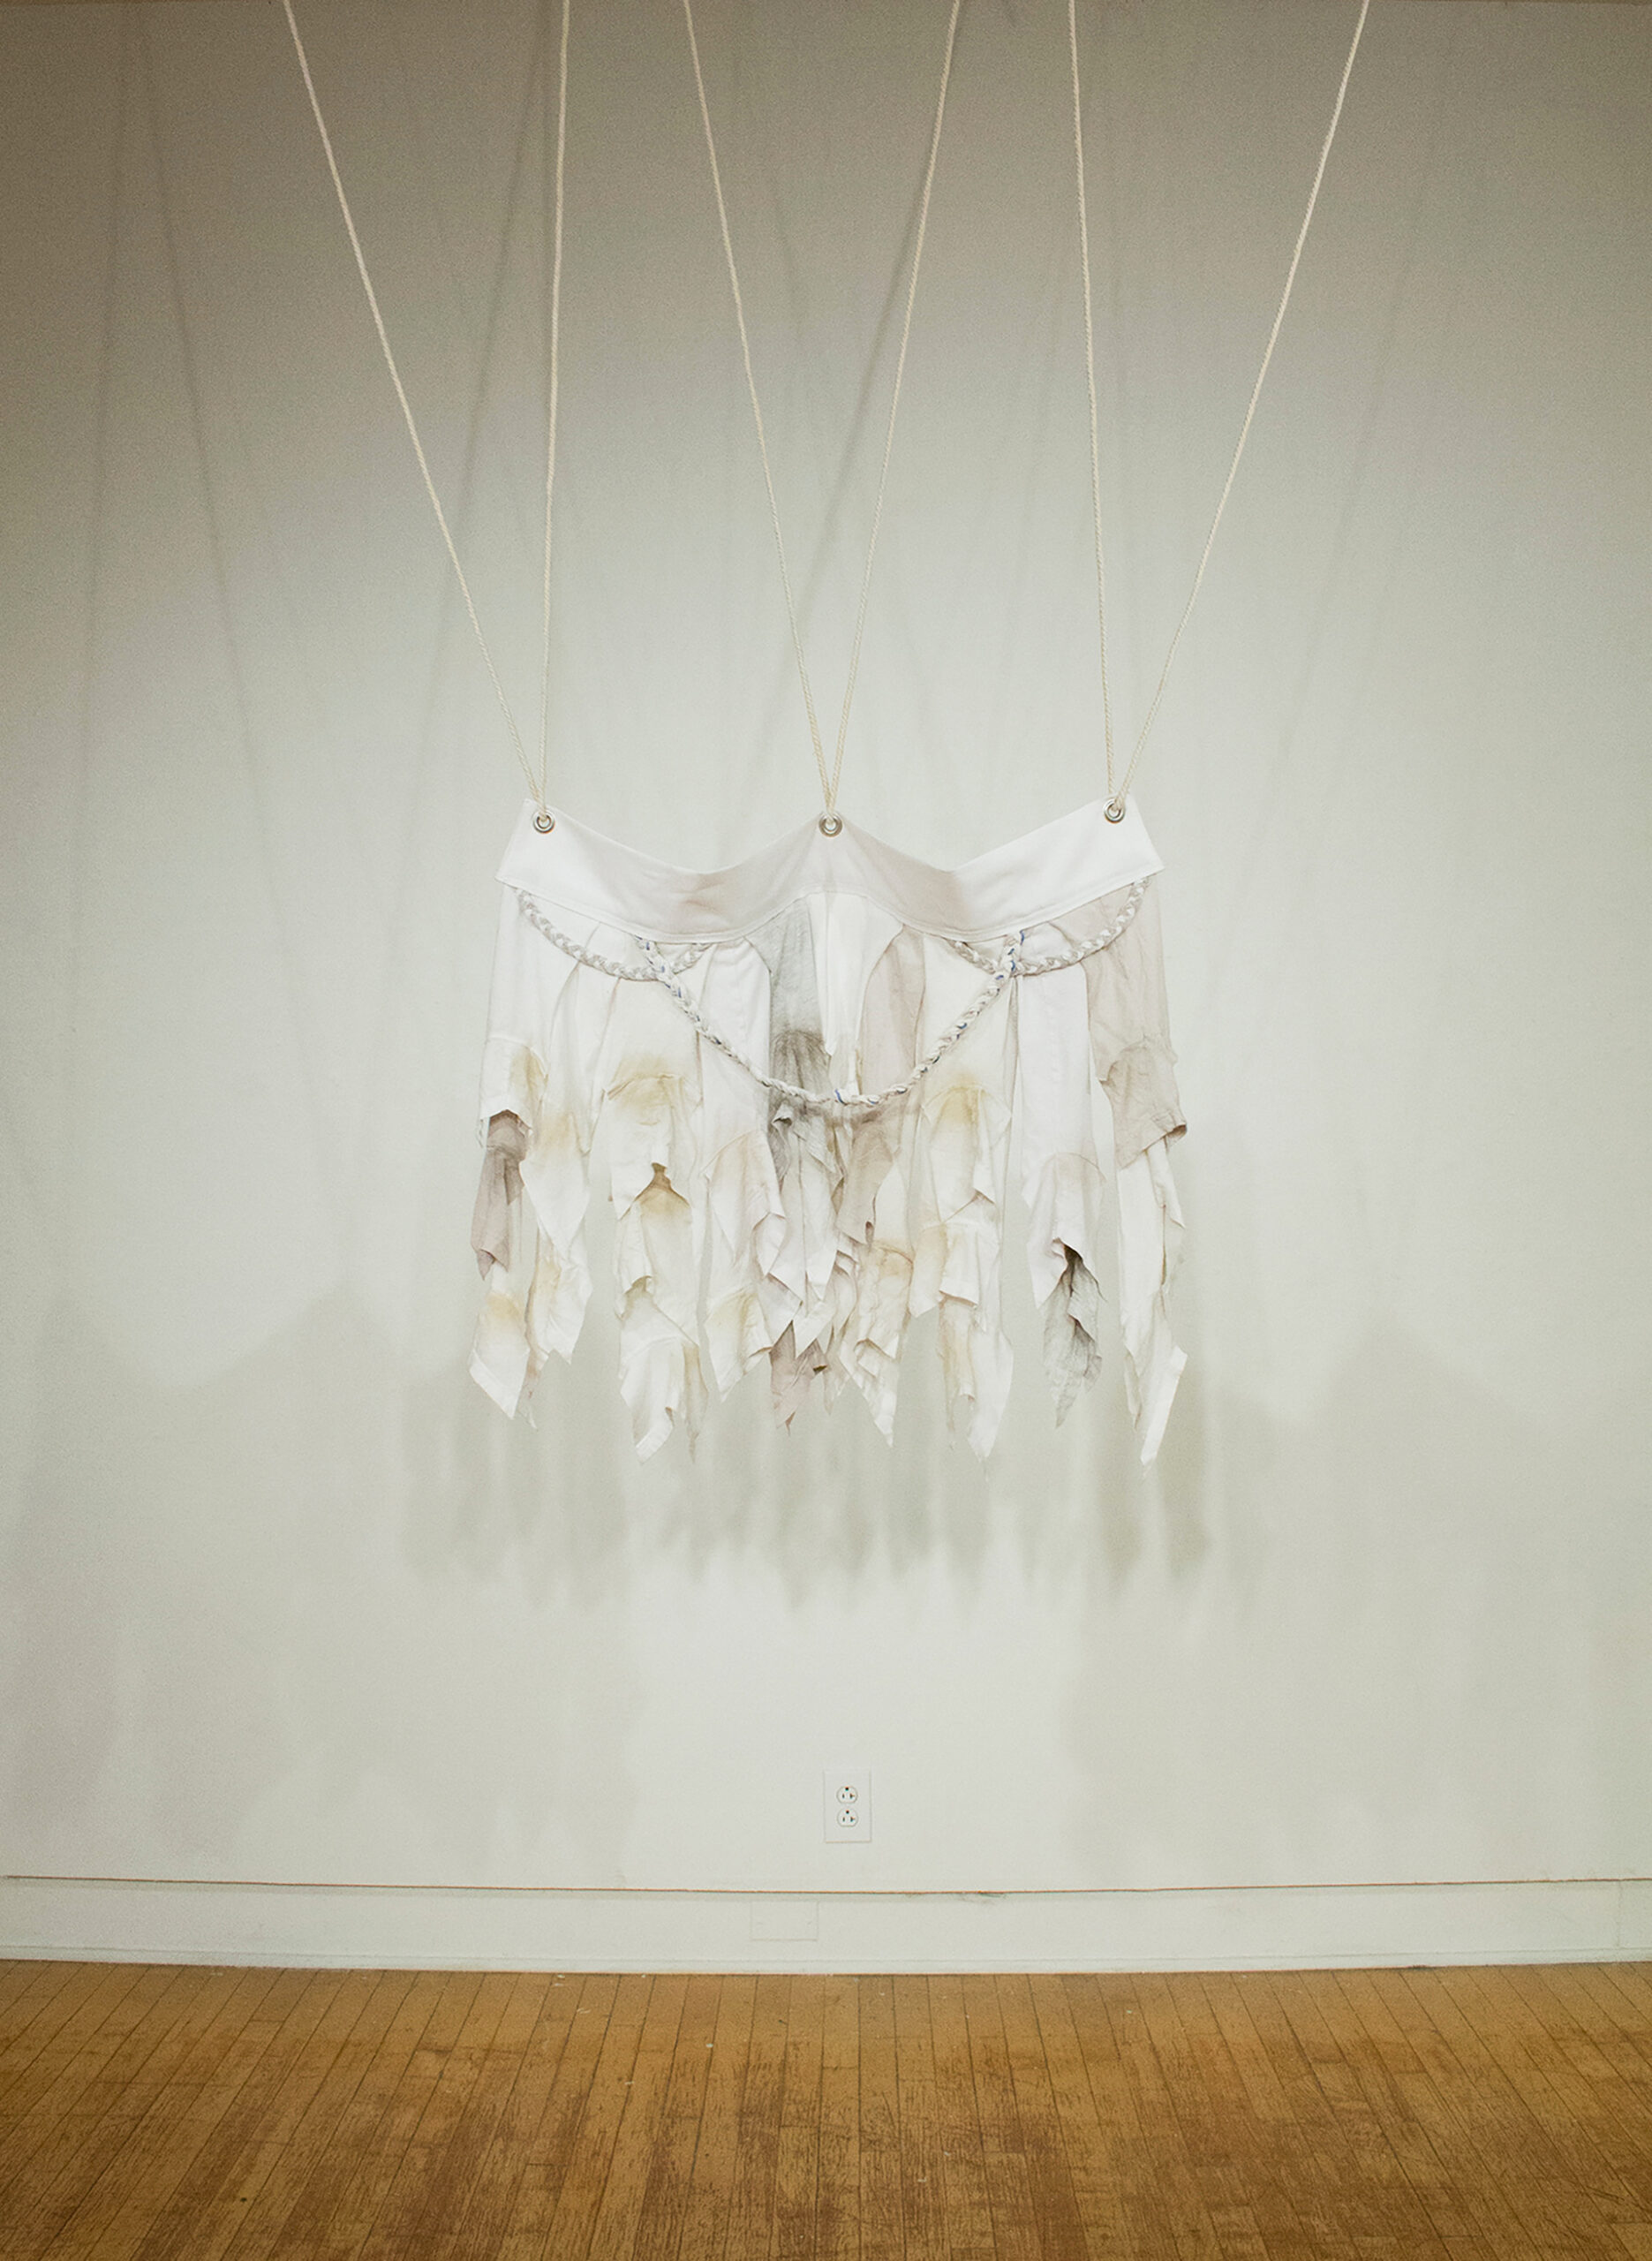 Repurposed undershirts create a non-objective sculpture that hangs from ropes through three grommets